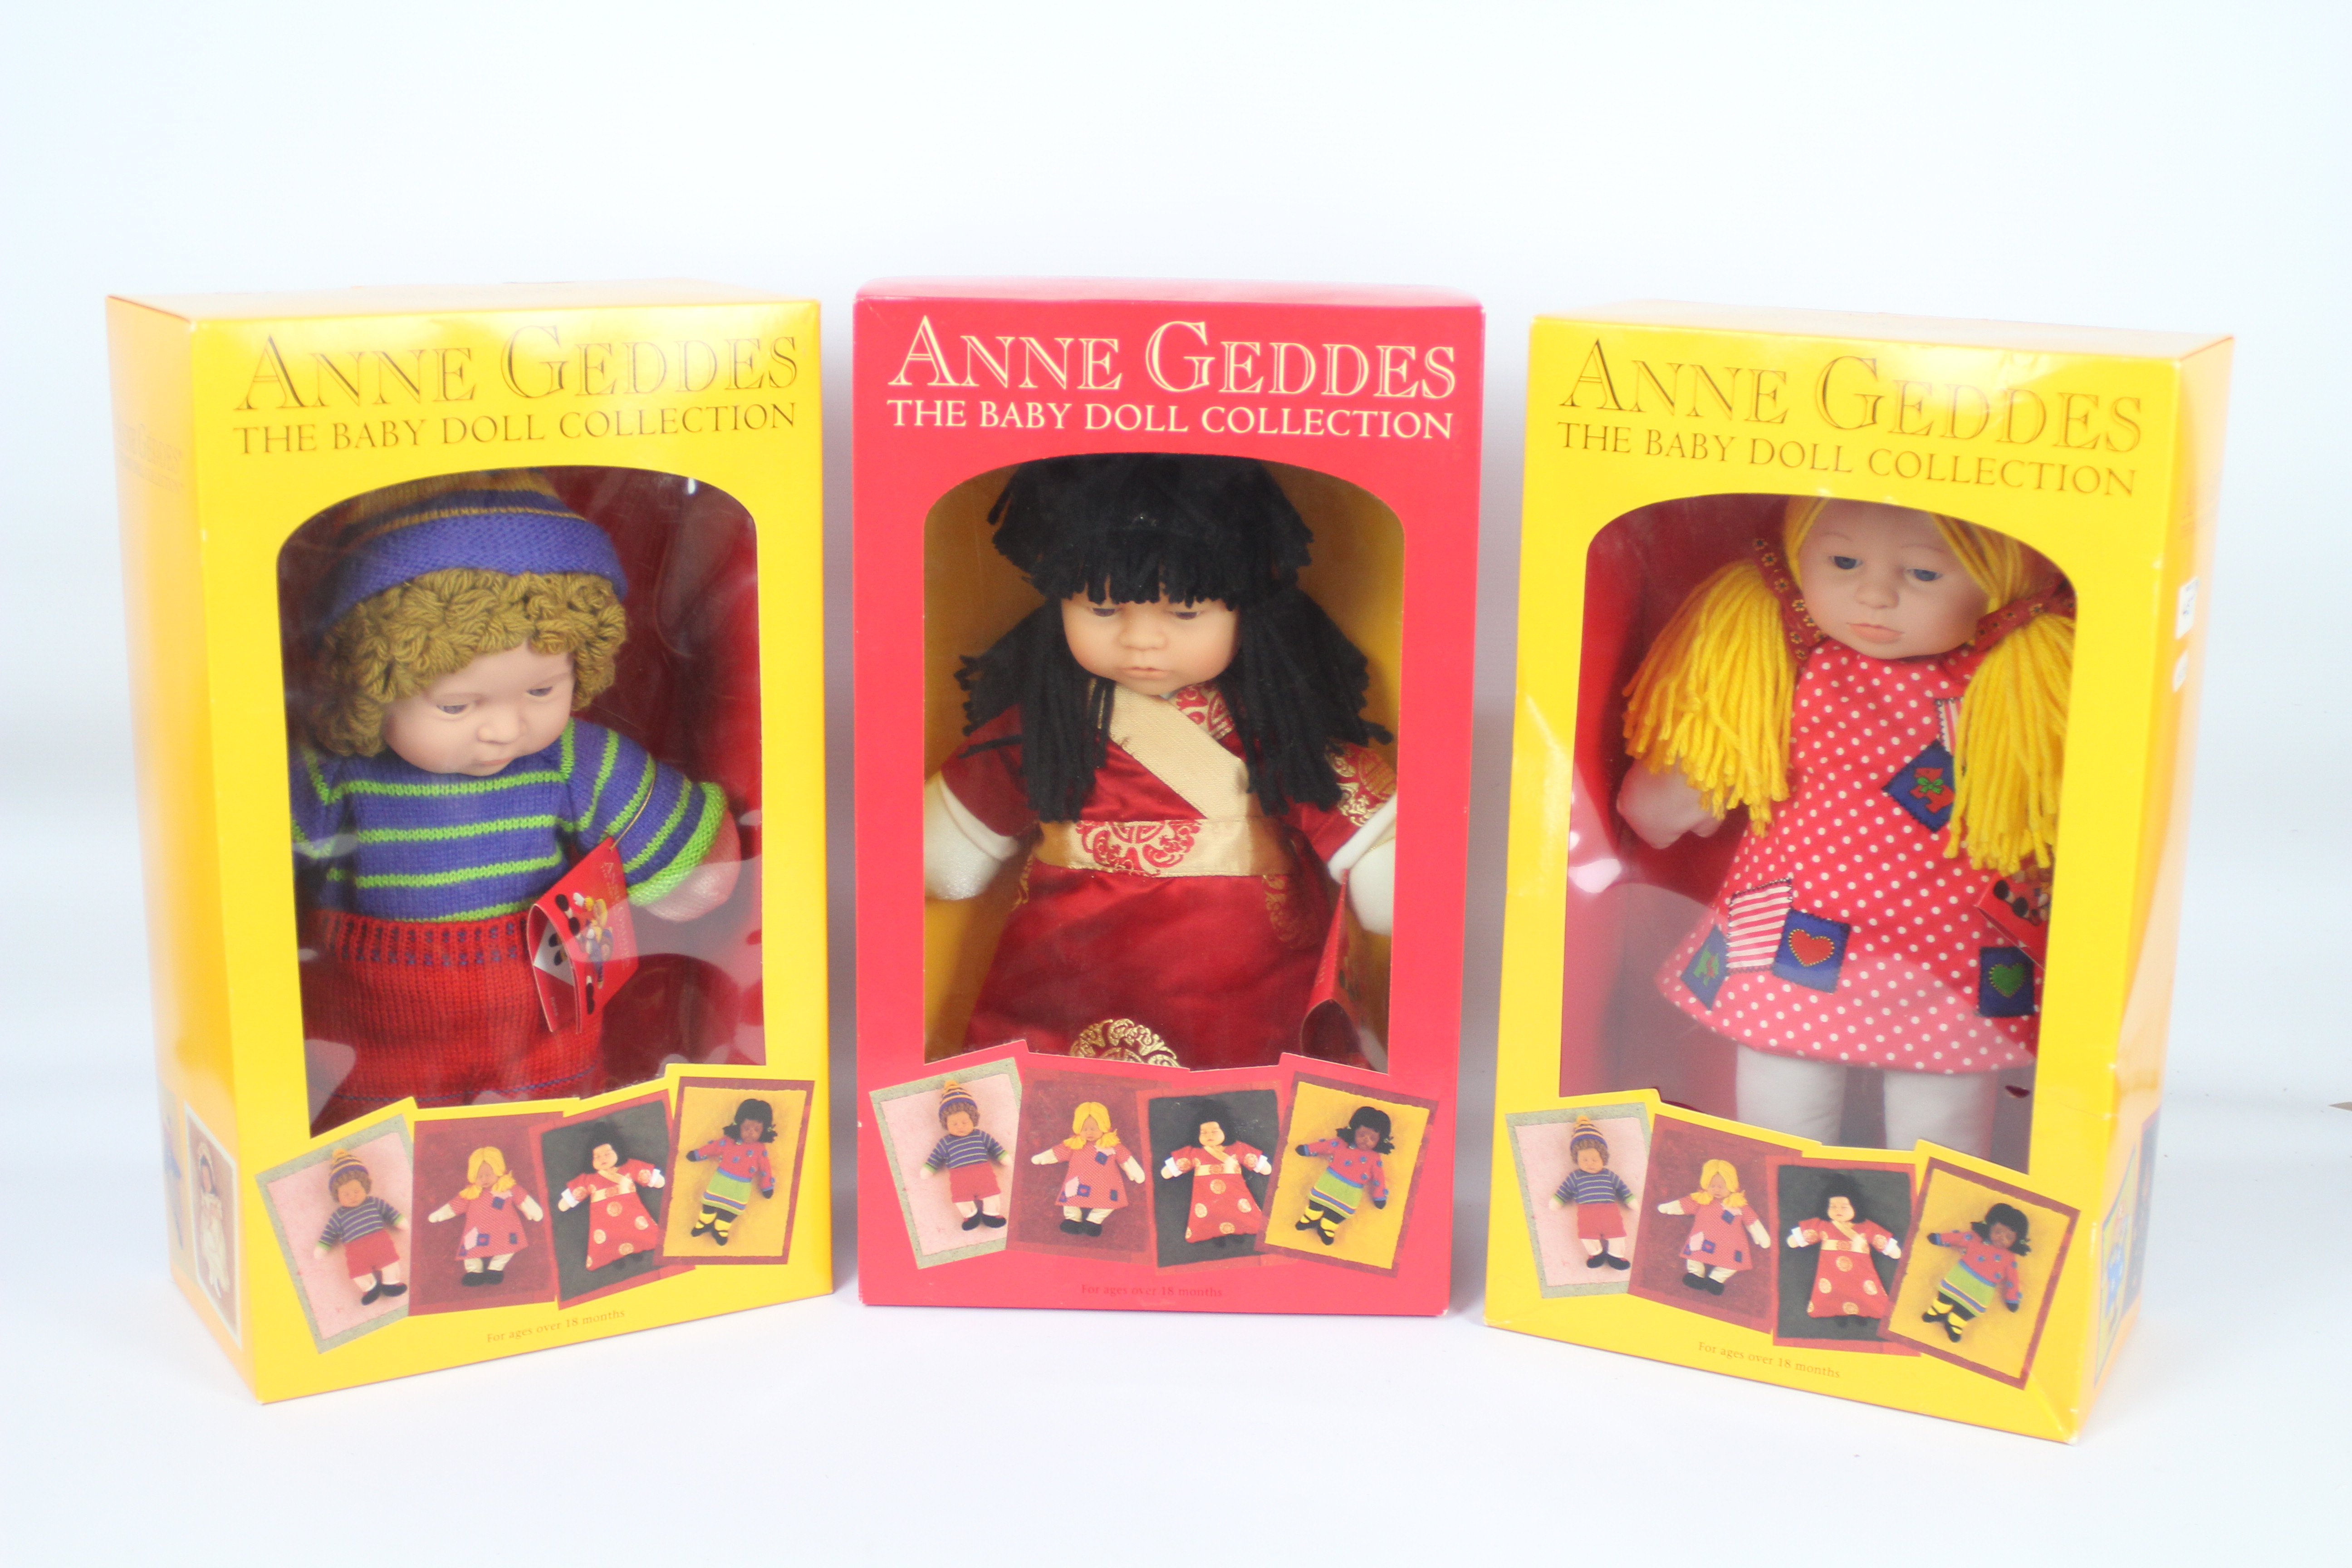 Anne Geddes, The Baby Doll Collection - 3 boxed dolls from the baby doll collection,